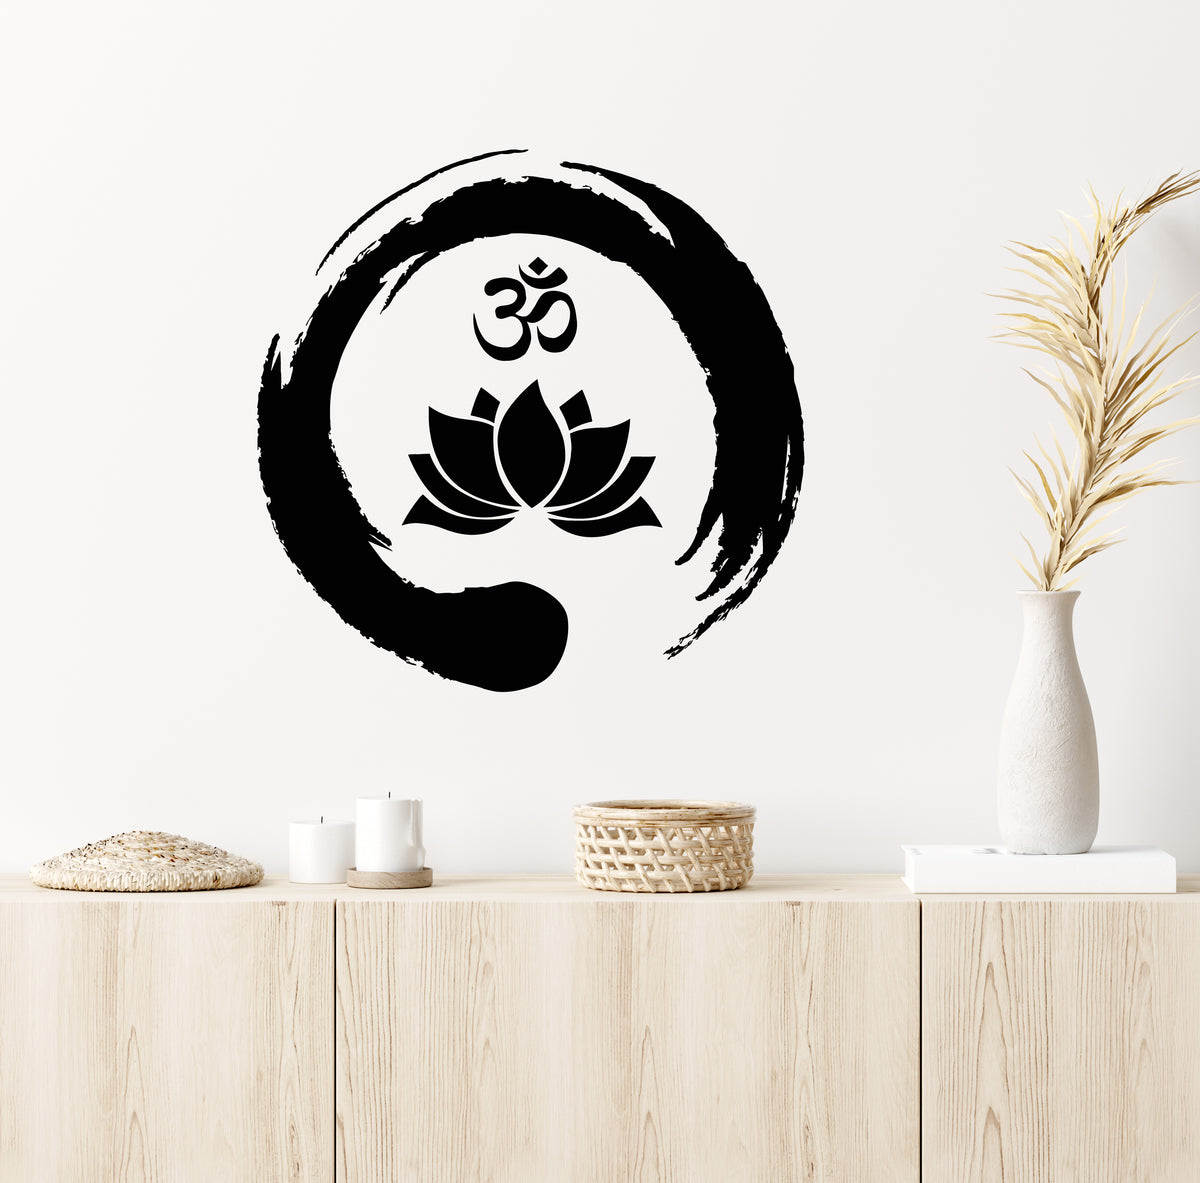 Vinyl Wall Decal Zen Yoga Center Icons Lotus Pose Meditation Stickers Mural  (g2384)